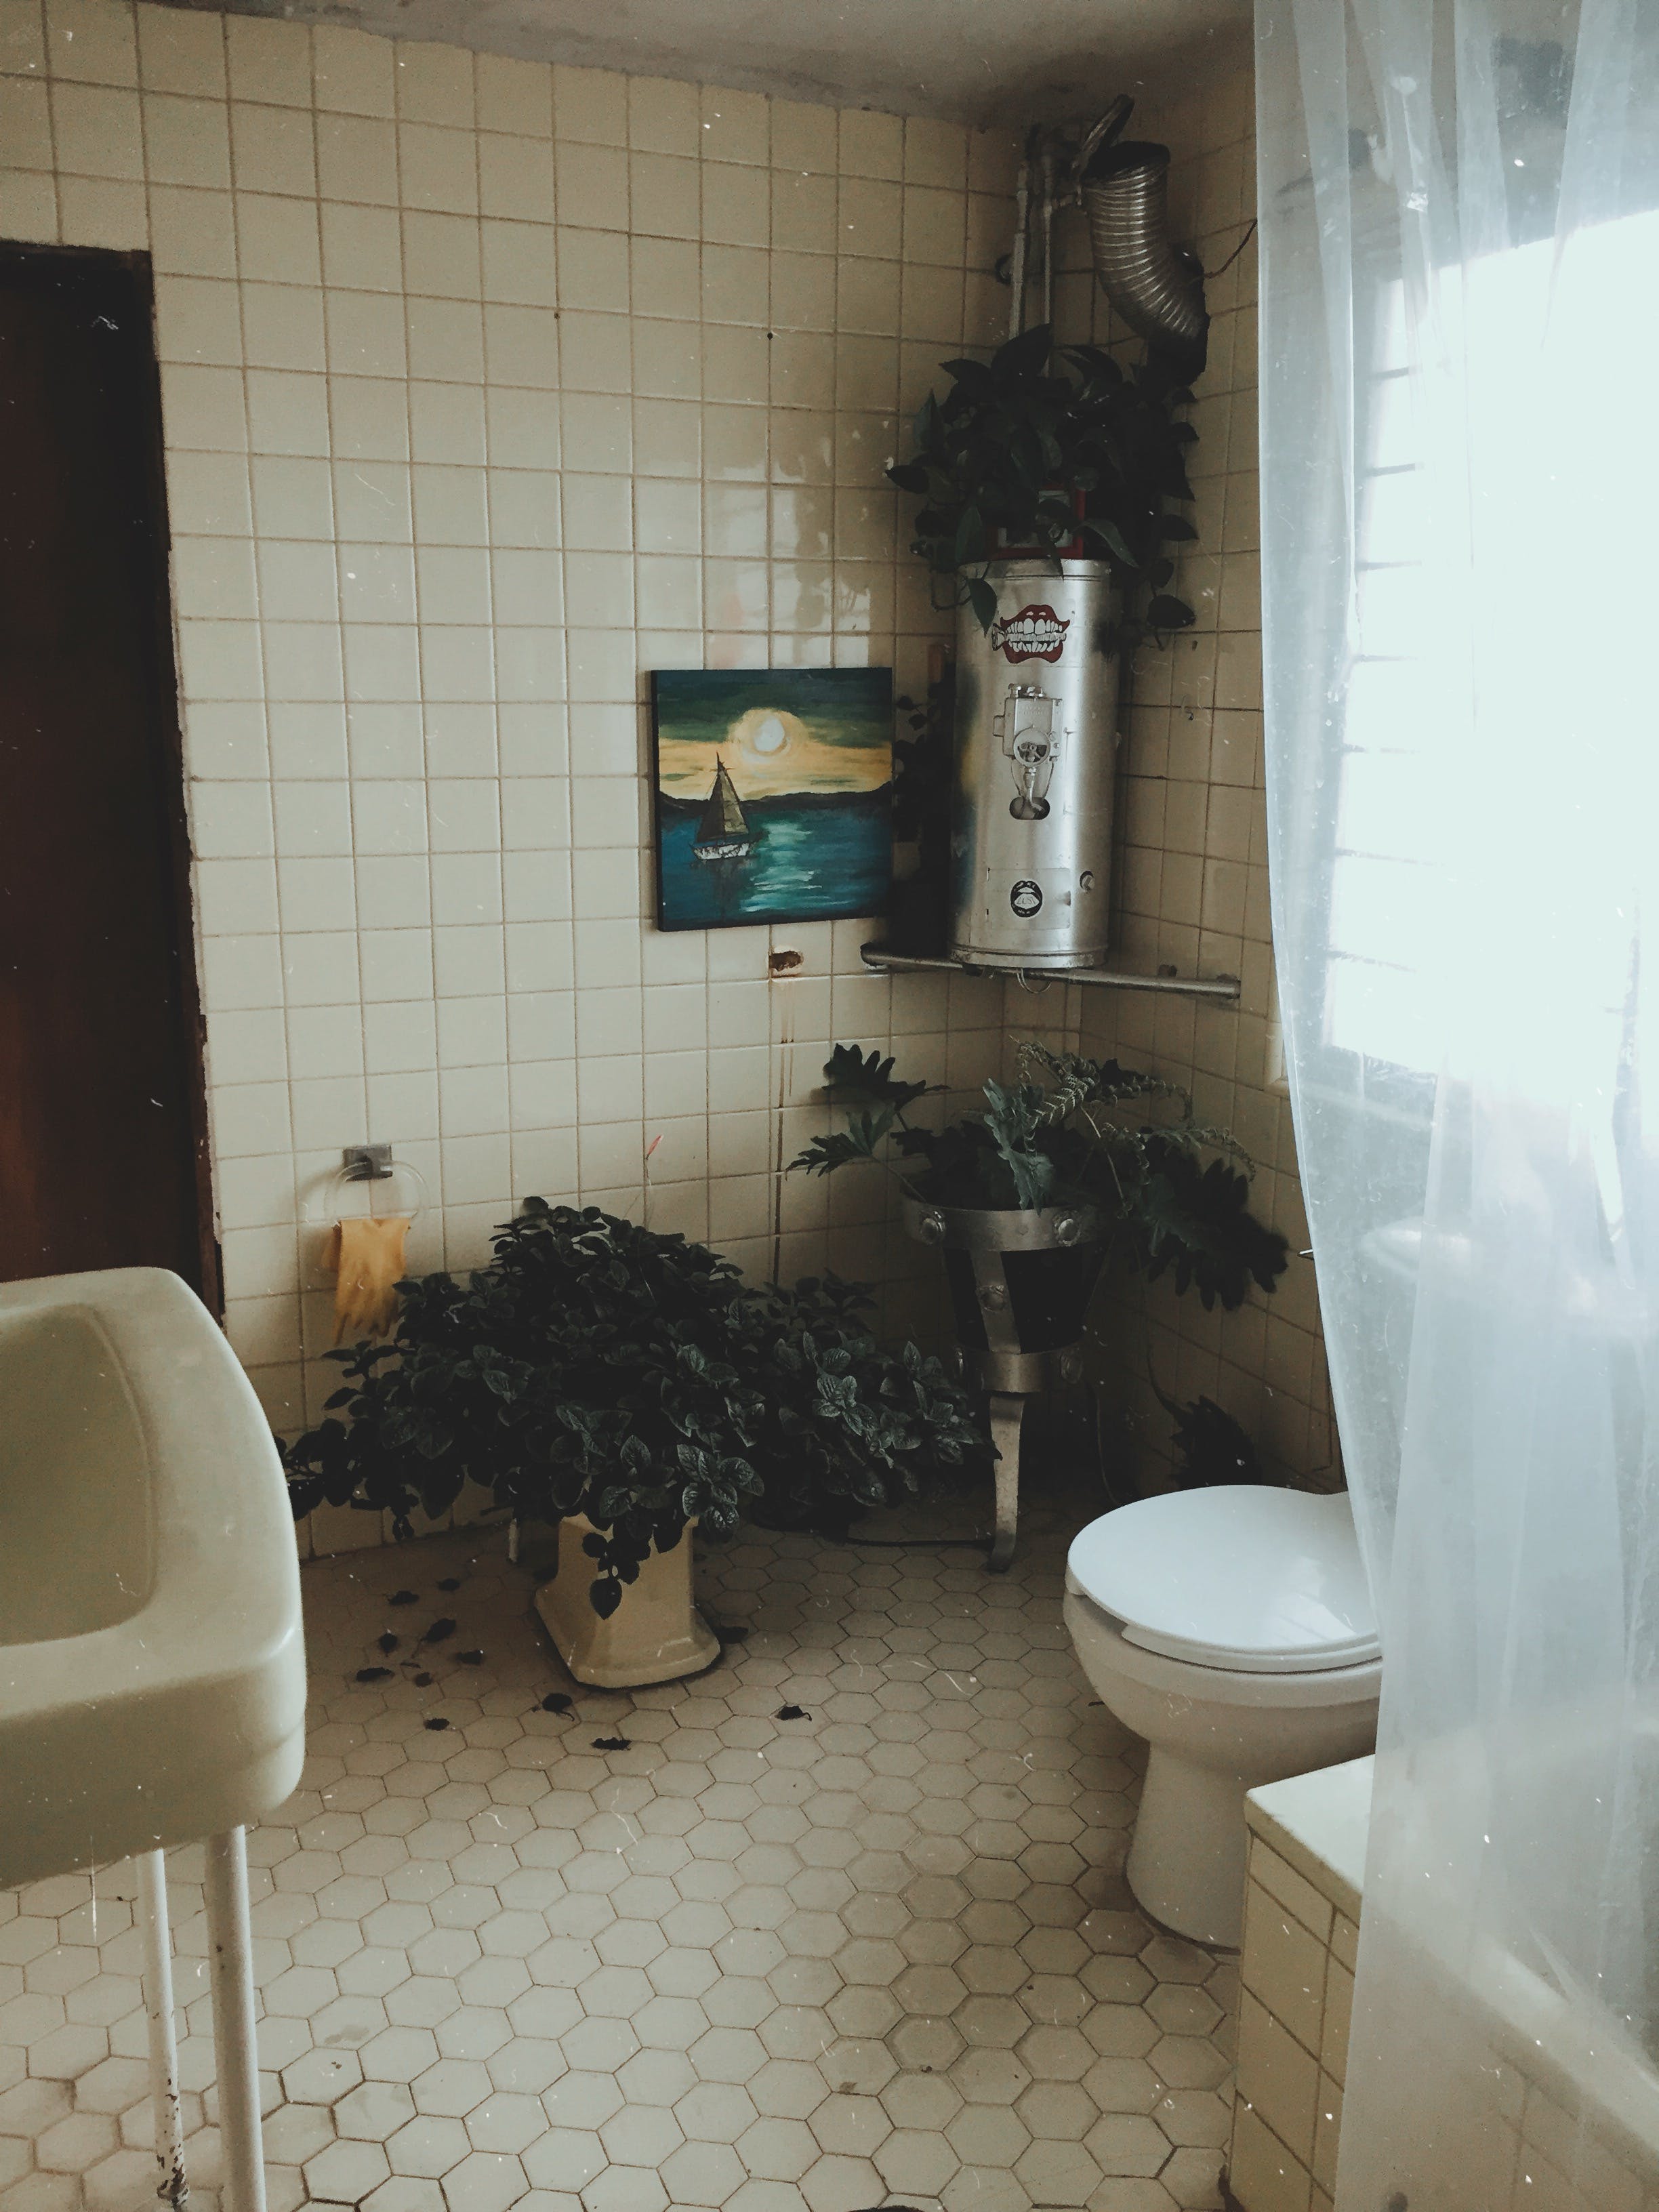 A view of a bathroom with a toilet and basin | Source: Pexels